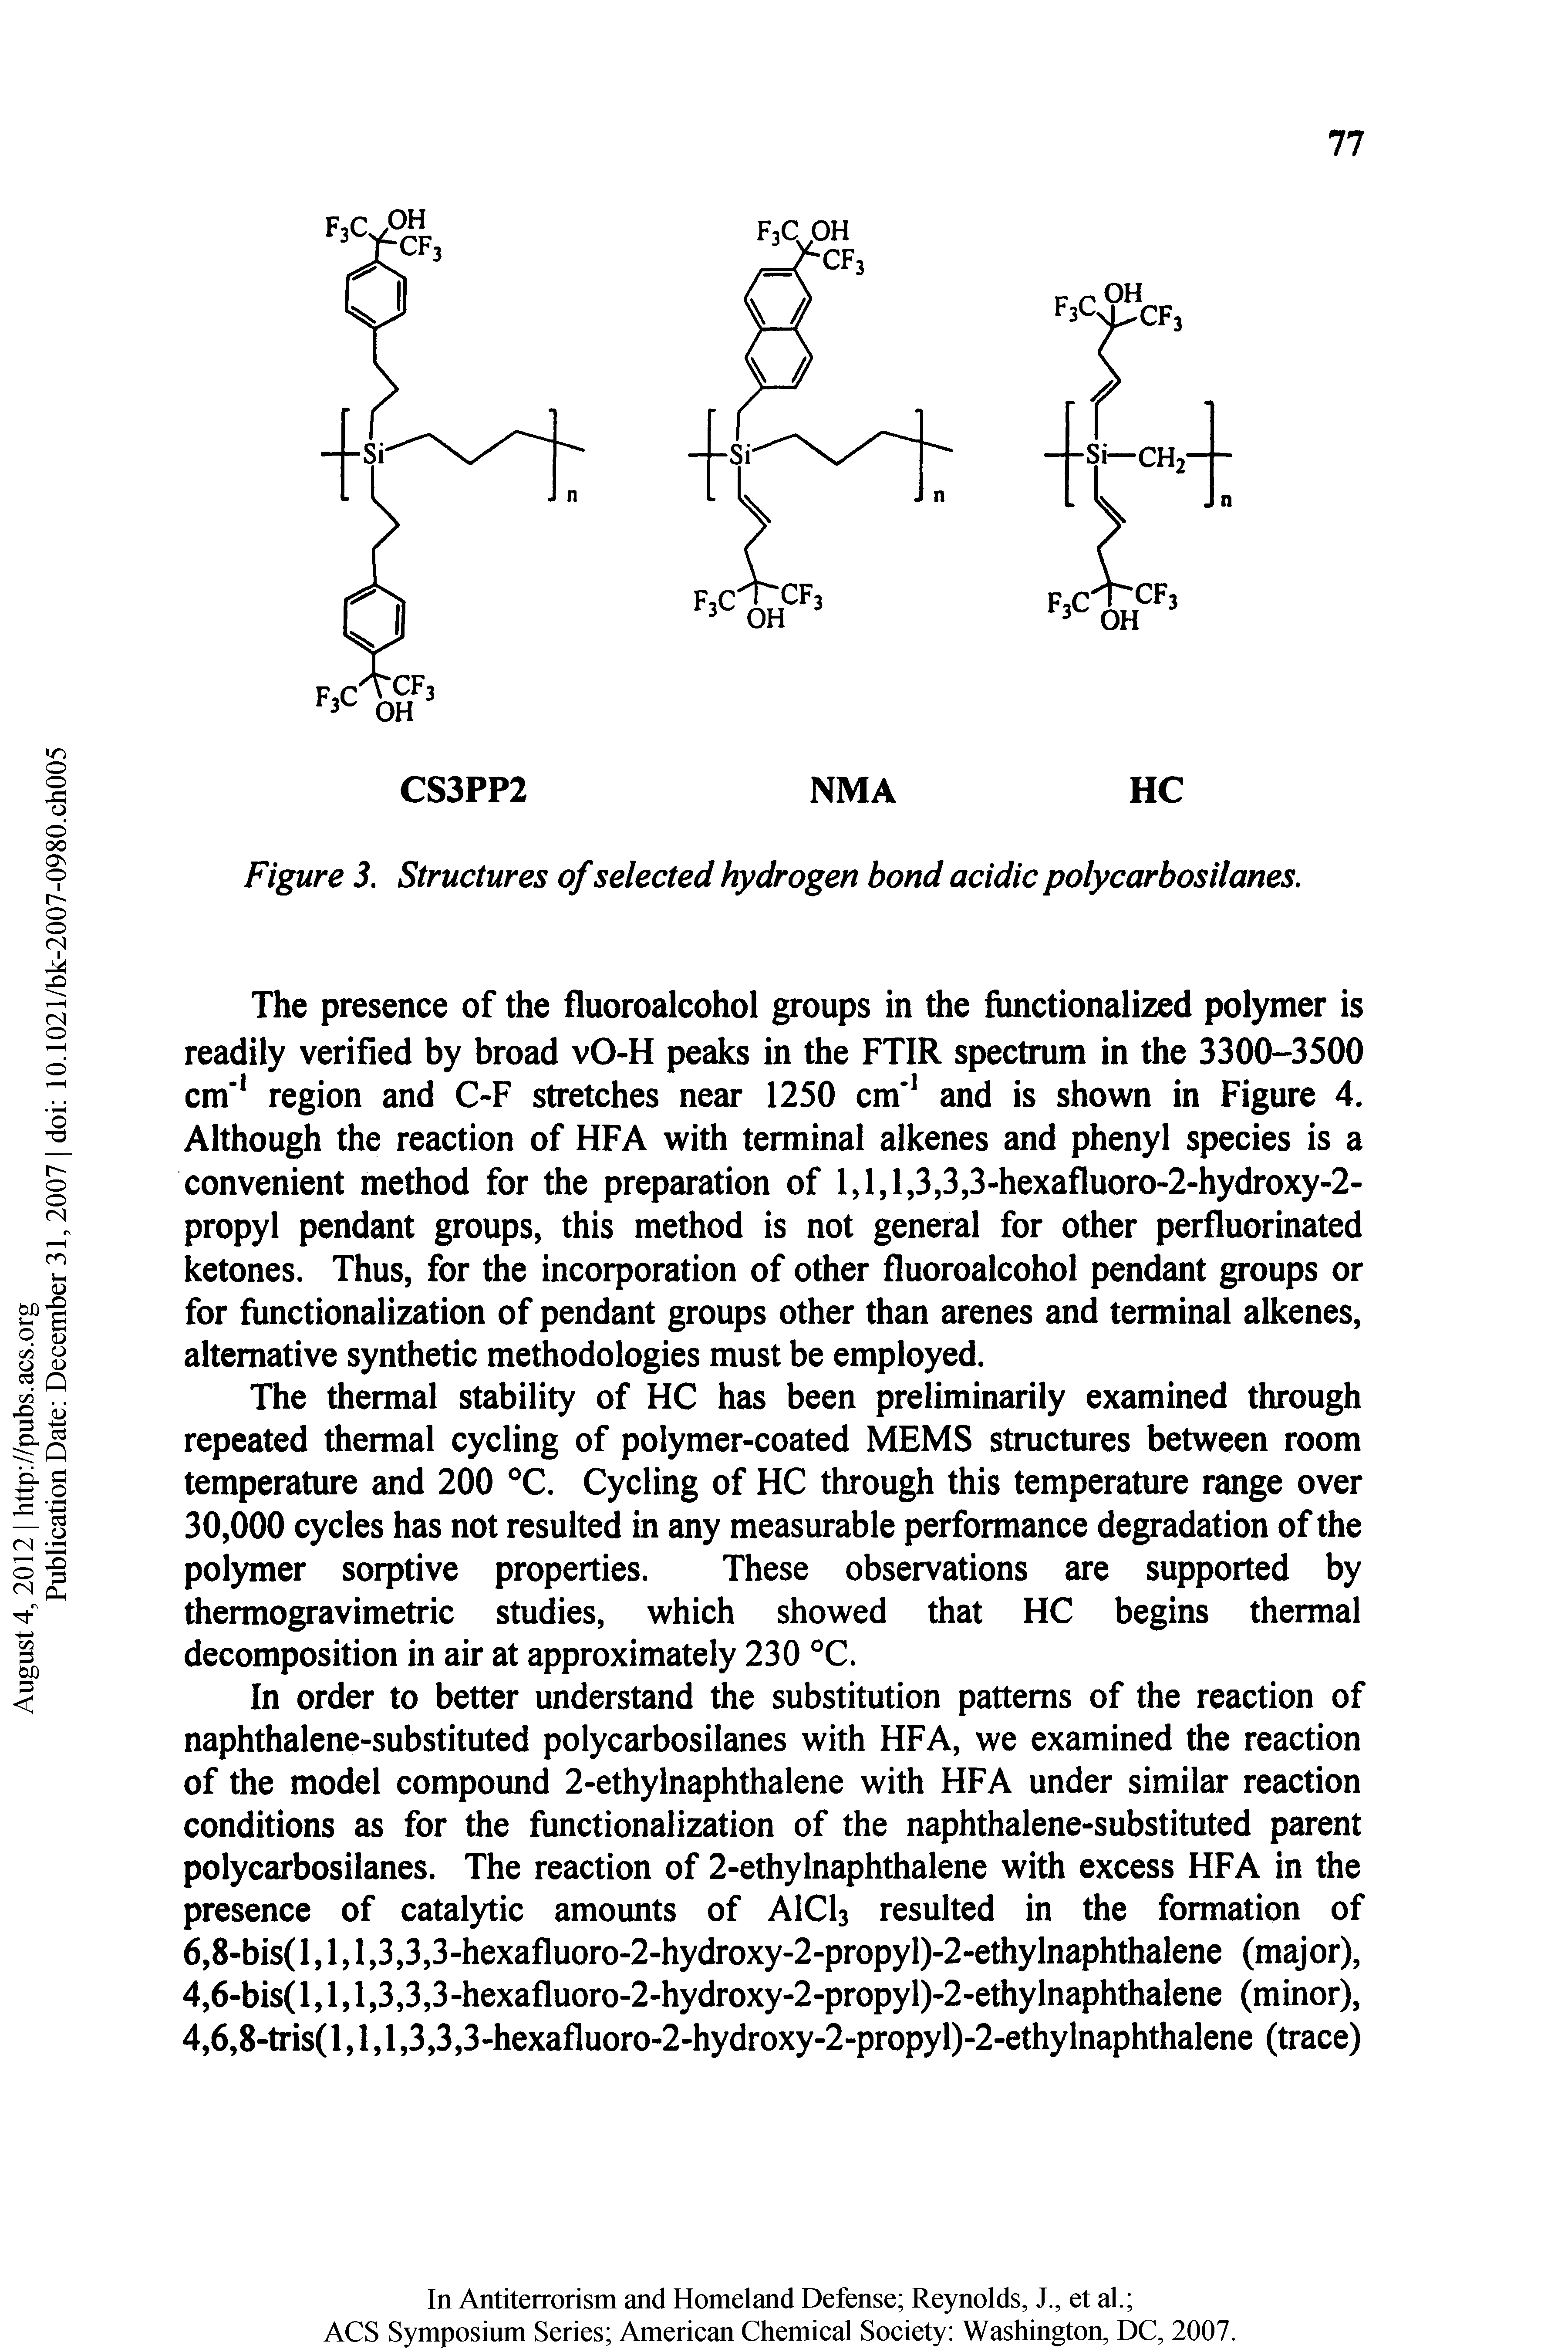 Figure 3. Structures of selected hydrogen bond acidic polycarbosilanes.